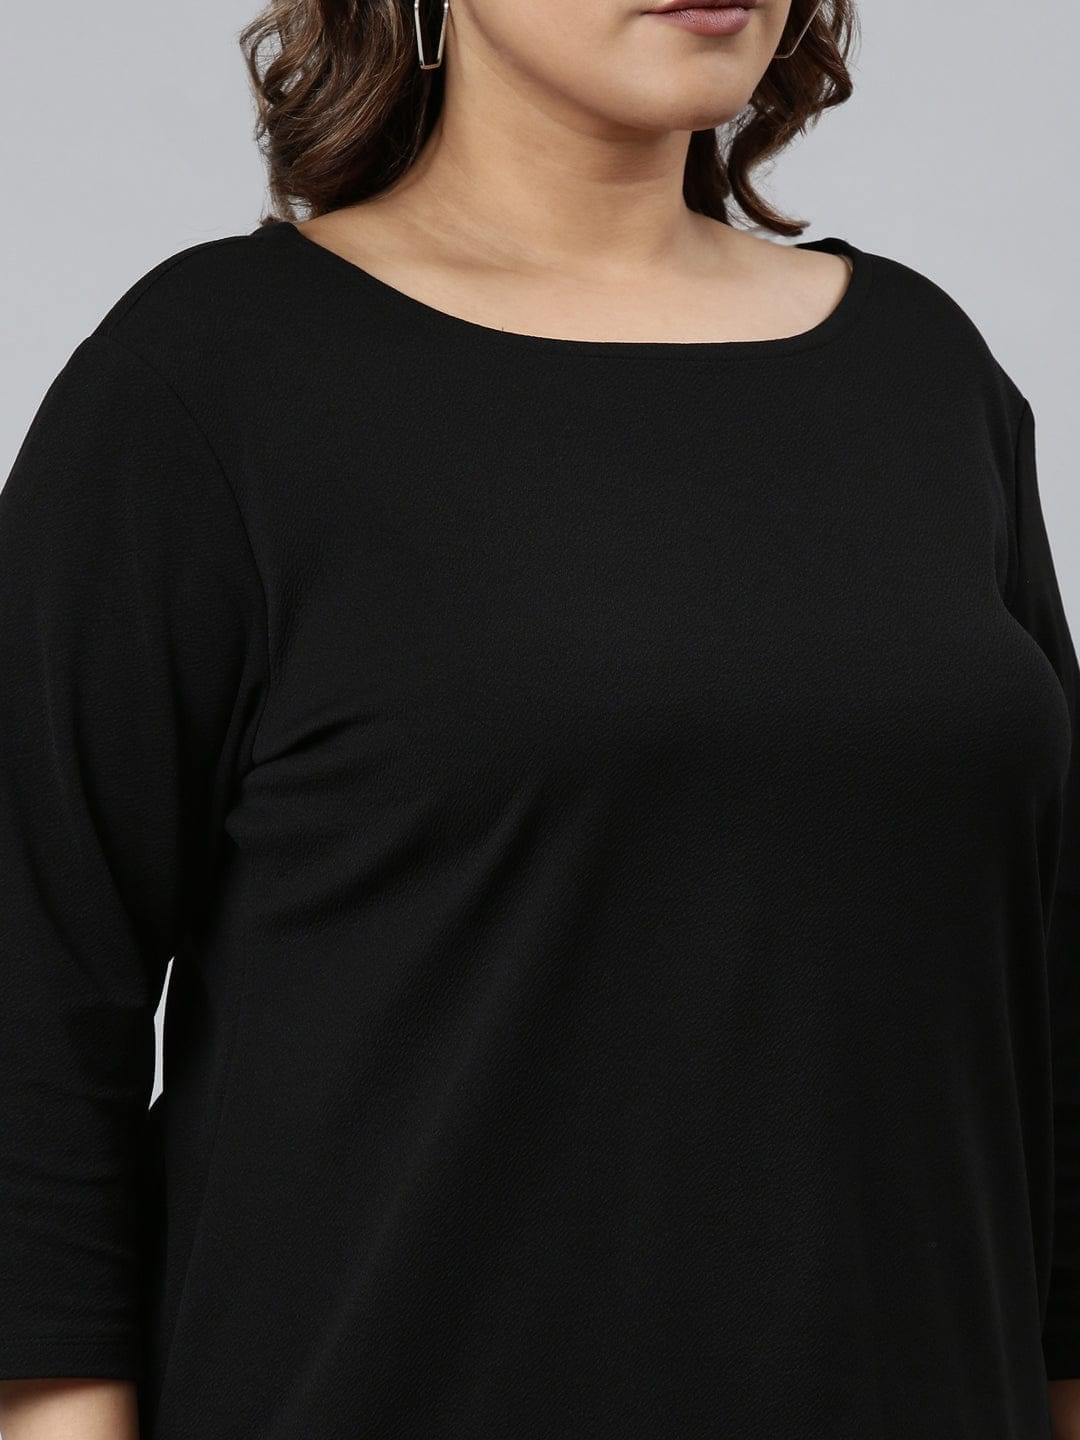 Black solid knitted Top